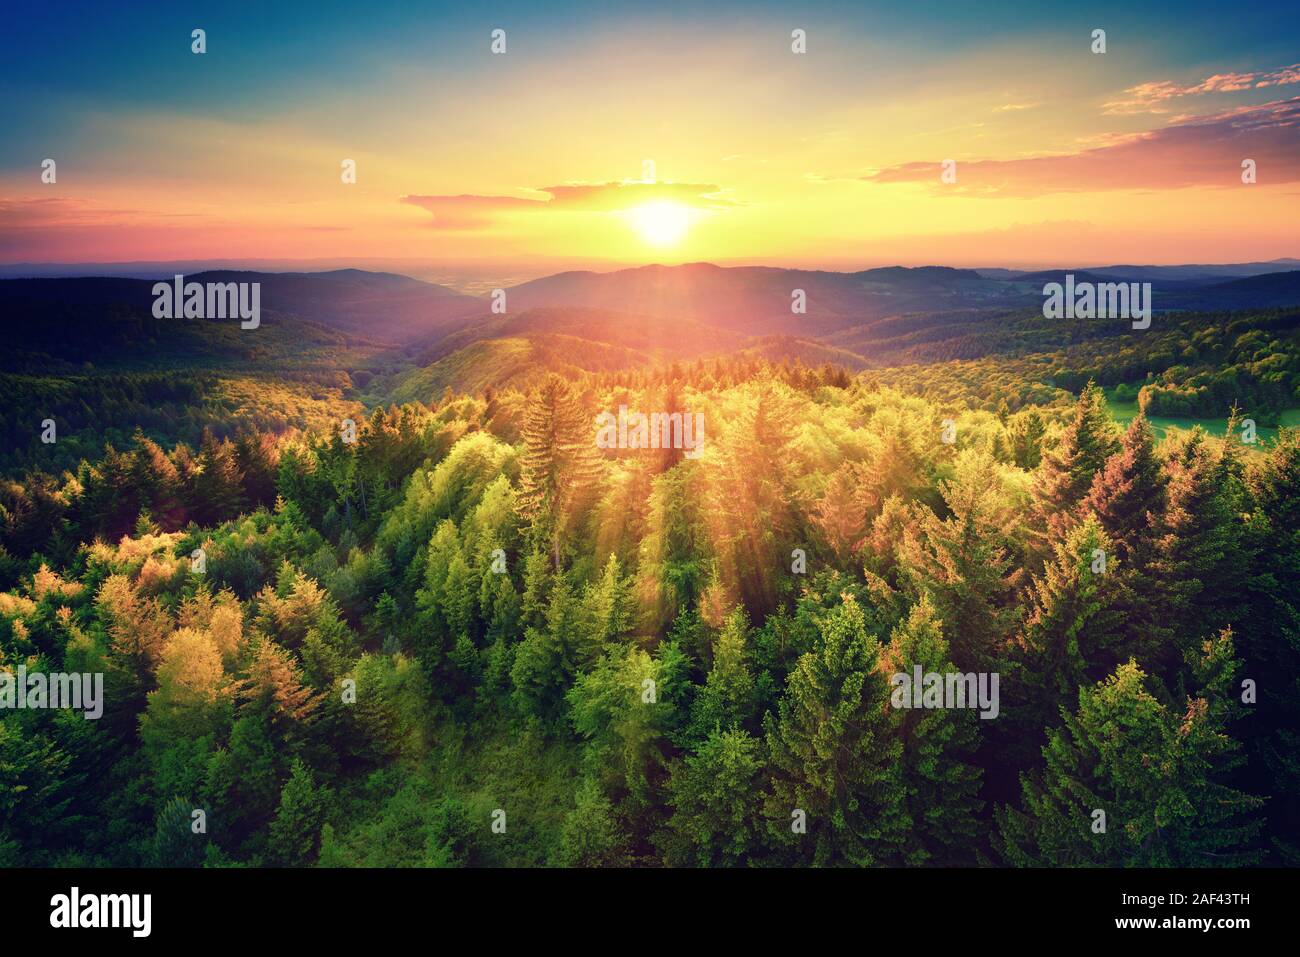 Bird's-eye view of a scenic sunset over the   forest hills, with toned dramatic colors Stock Photo